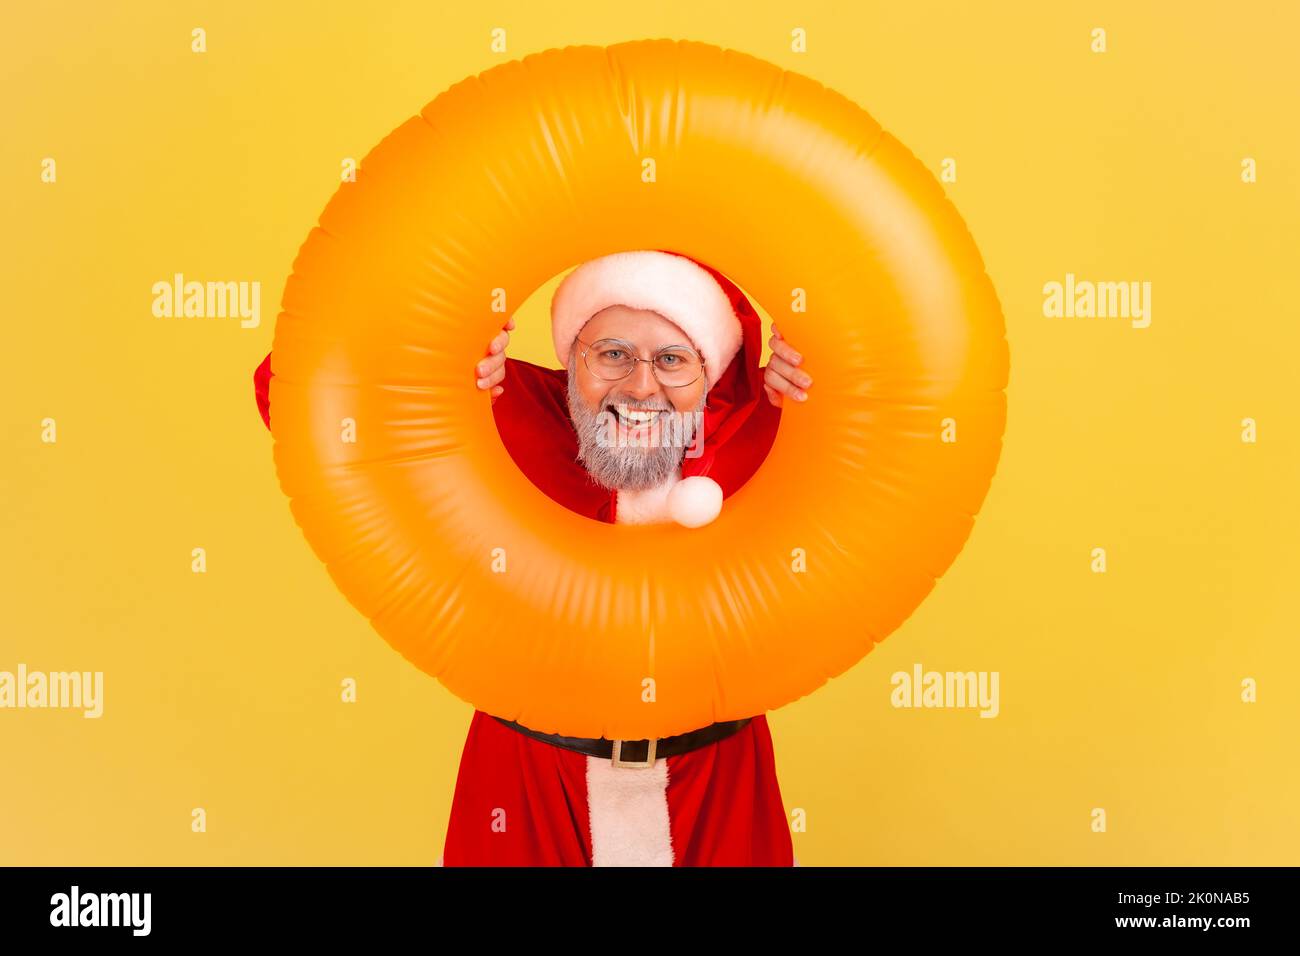 Smiling elderly man with gray beard in santa claus costume holding orange rubber ring in hands, looking at camera with happy expression, winter tour. Indoor studio shot isolated on yellow background. Stock Photo